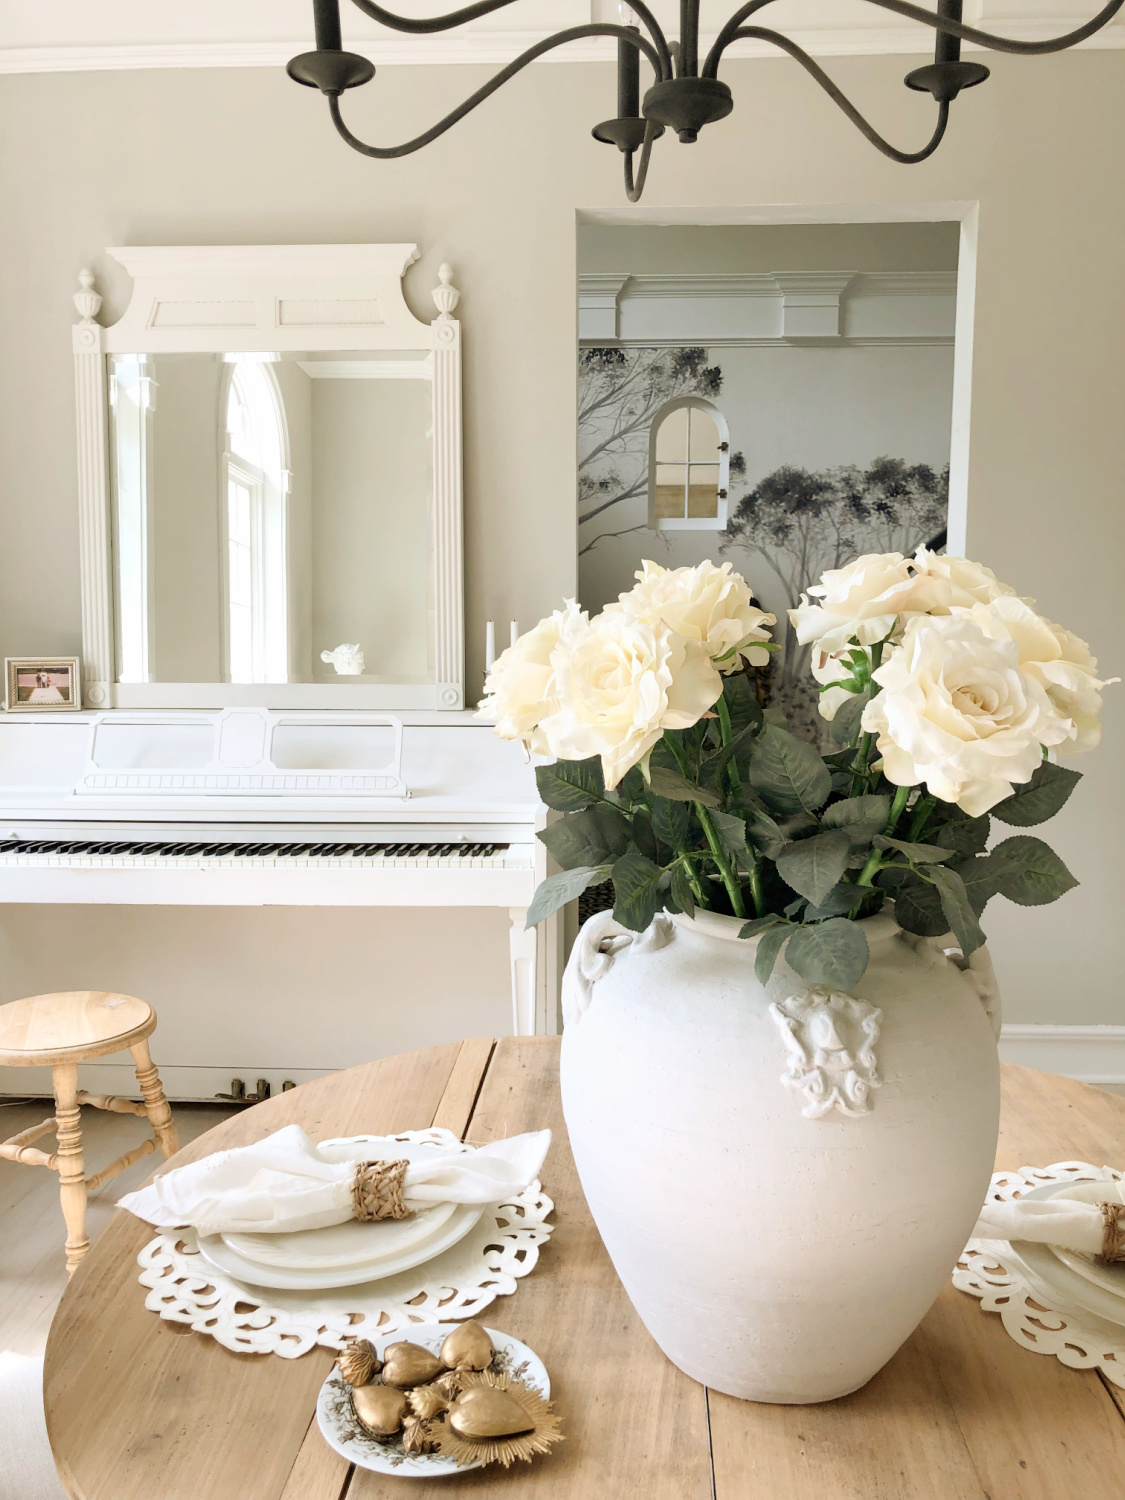 Sherwin-Williams Repose Gray in my modern French dining room with white piano and white roses - Hello Lovely Studio. #modernfrench #reposegray